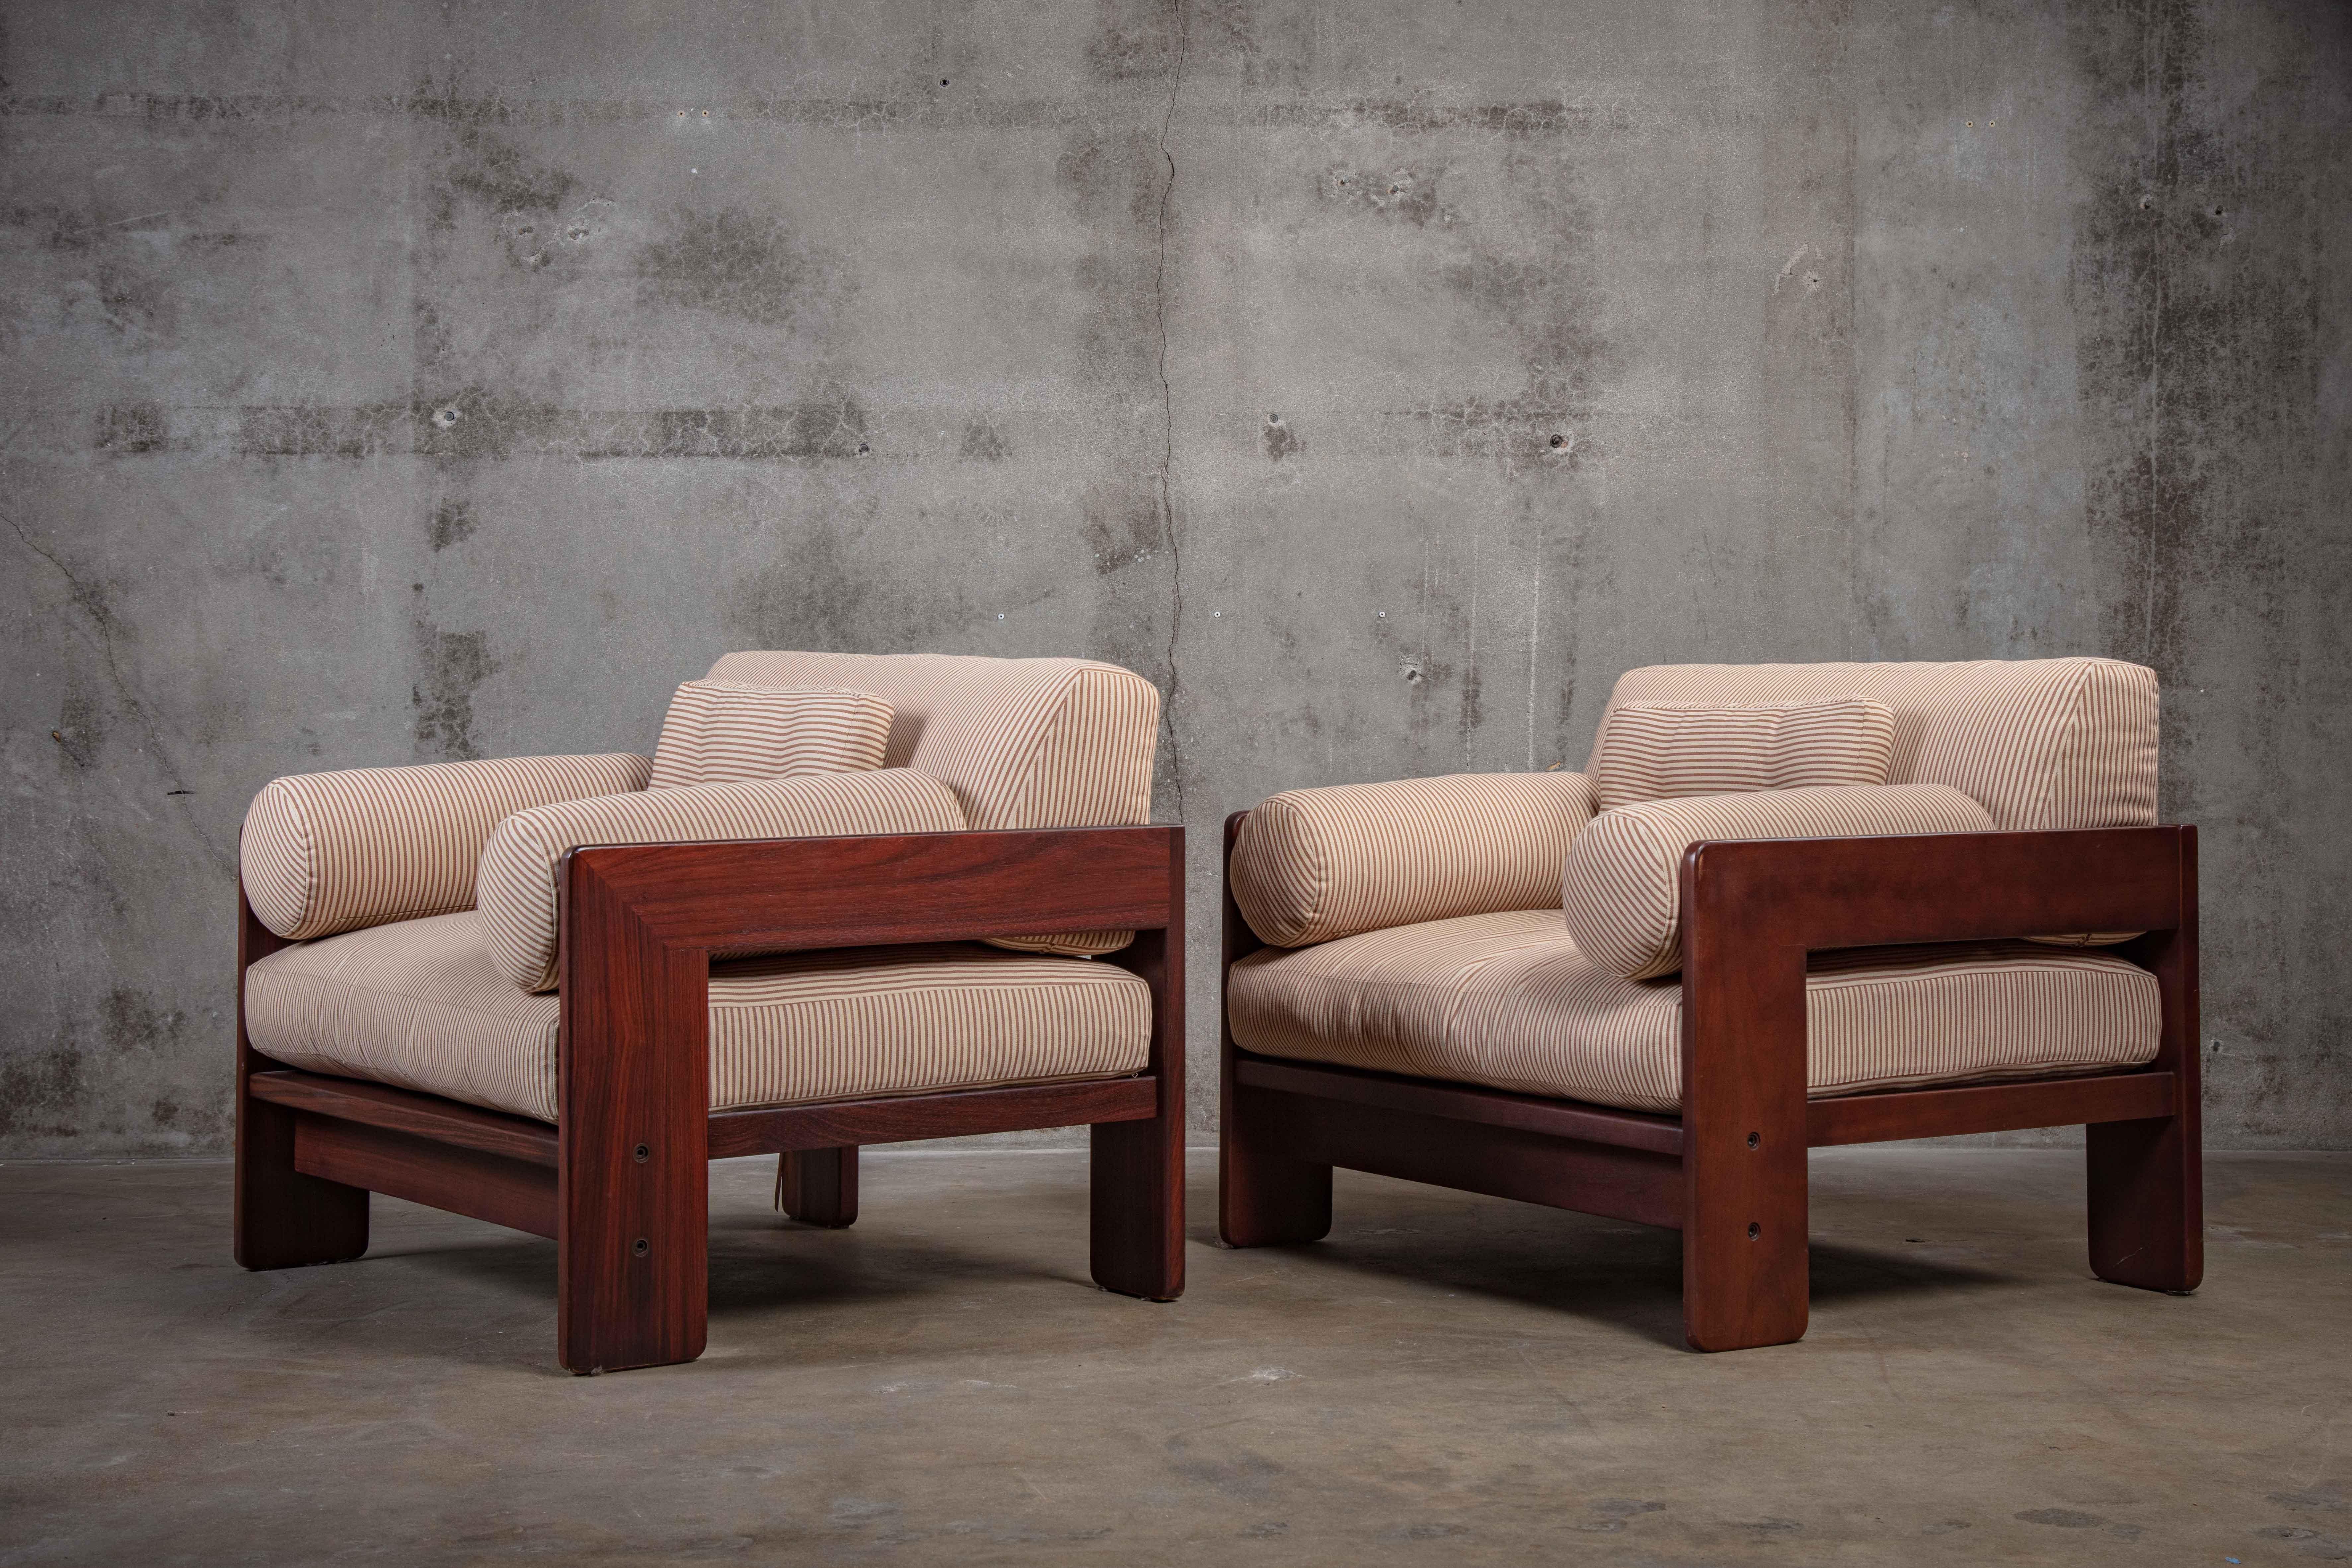 Pair of Tobia Scarpa Italian walnut armchairs, 1960s

Dimensions are of the frames.